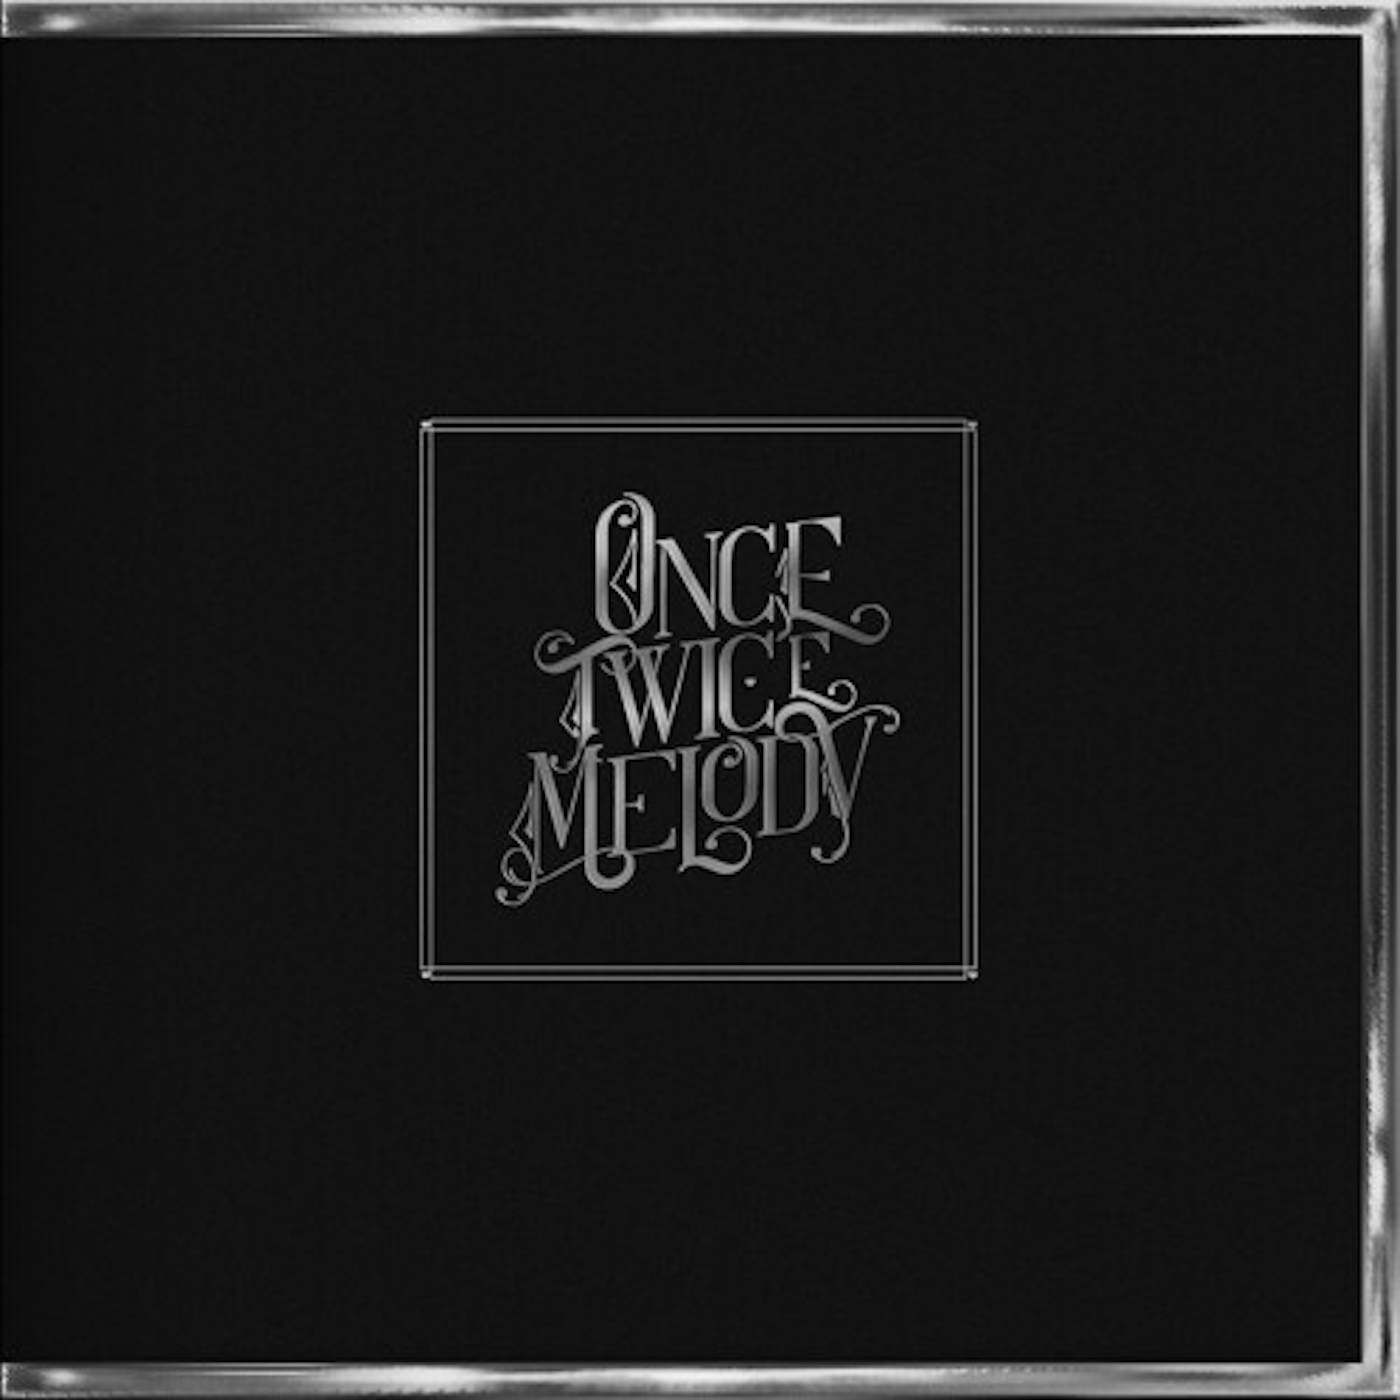 Beach House ONCE TWICE MELODY CD